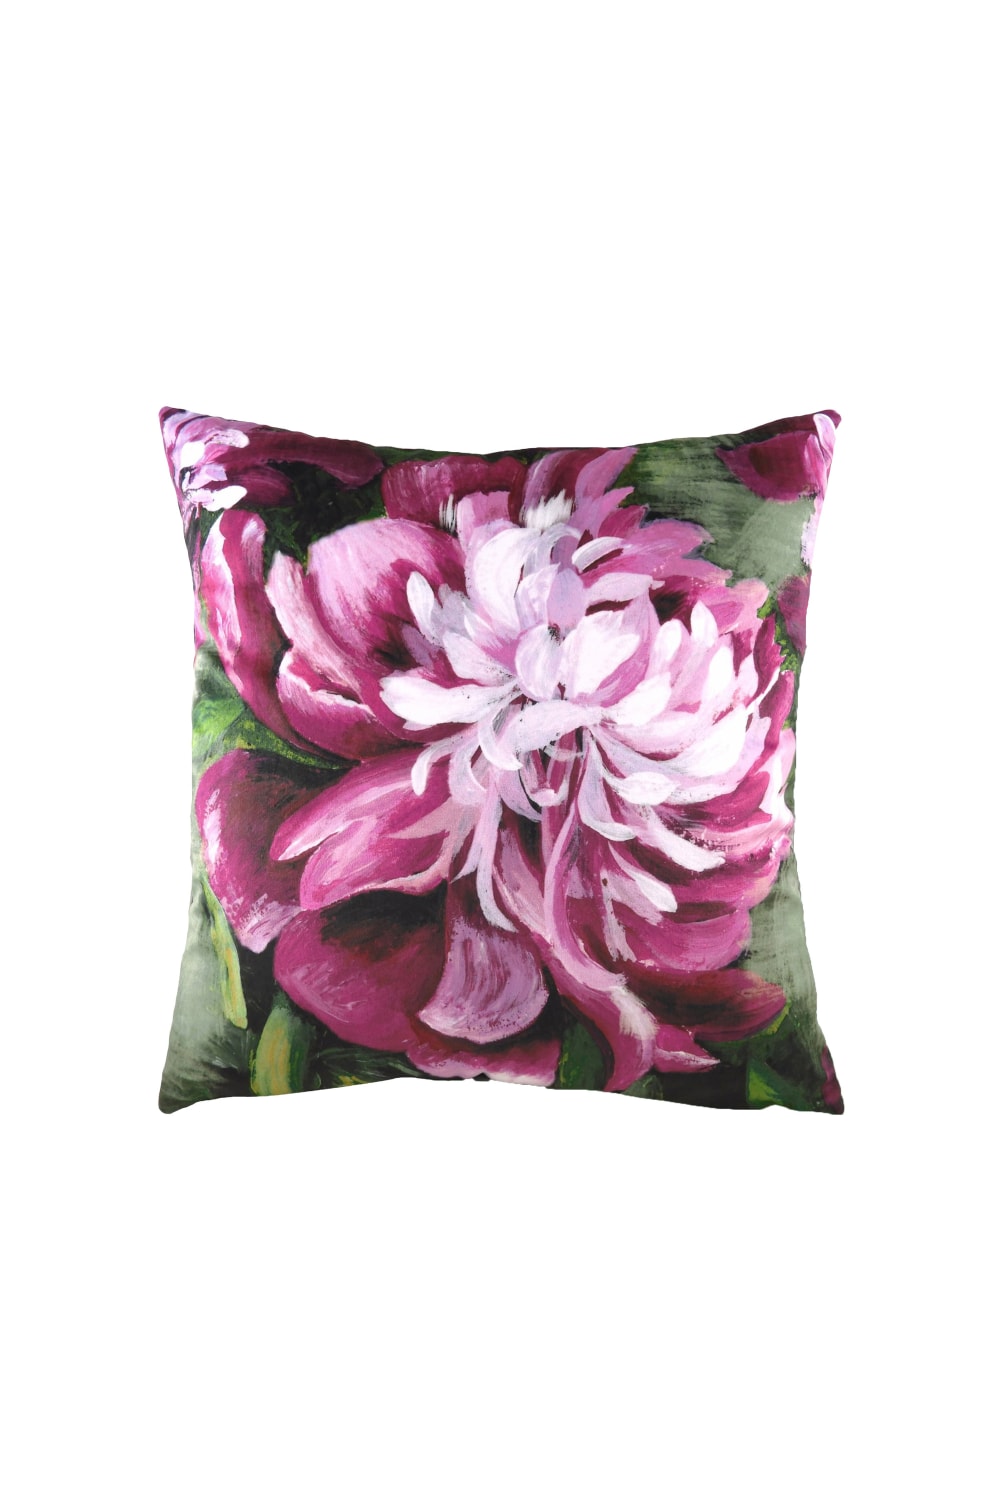 Evans Lichfield Winter Florals Peony Throw Pillow Cover